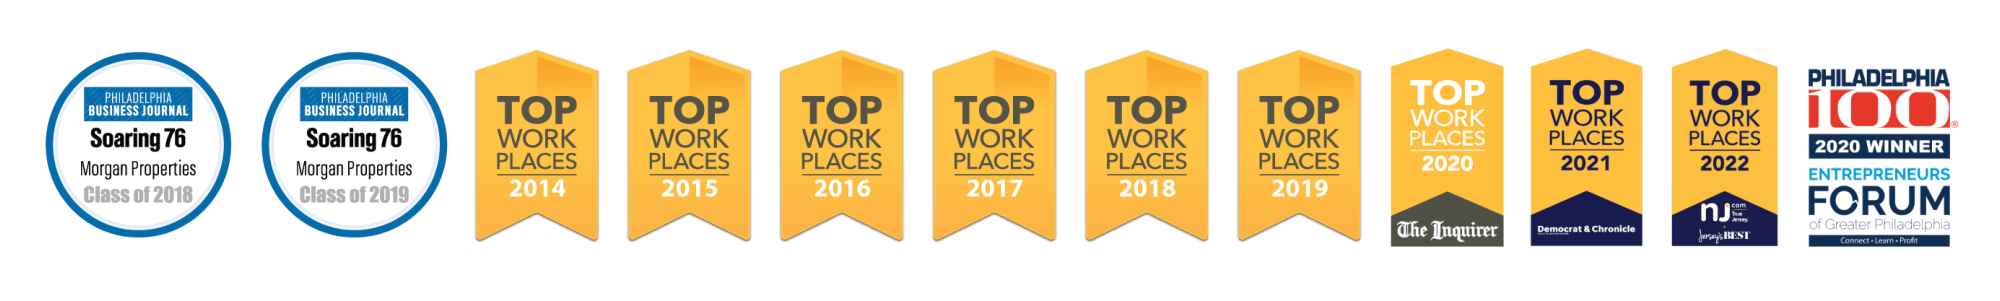 Selection of Morgan Properties's awards, including Philadelphia Business Journal Soaring 76 and Democrat & Chronicle Top Workplace